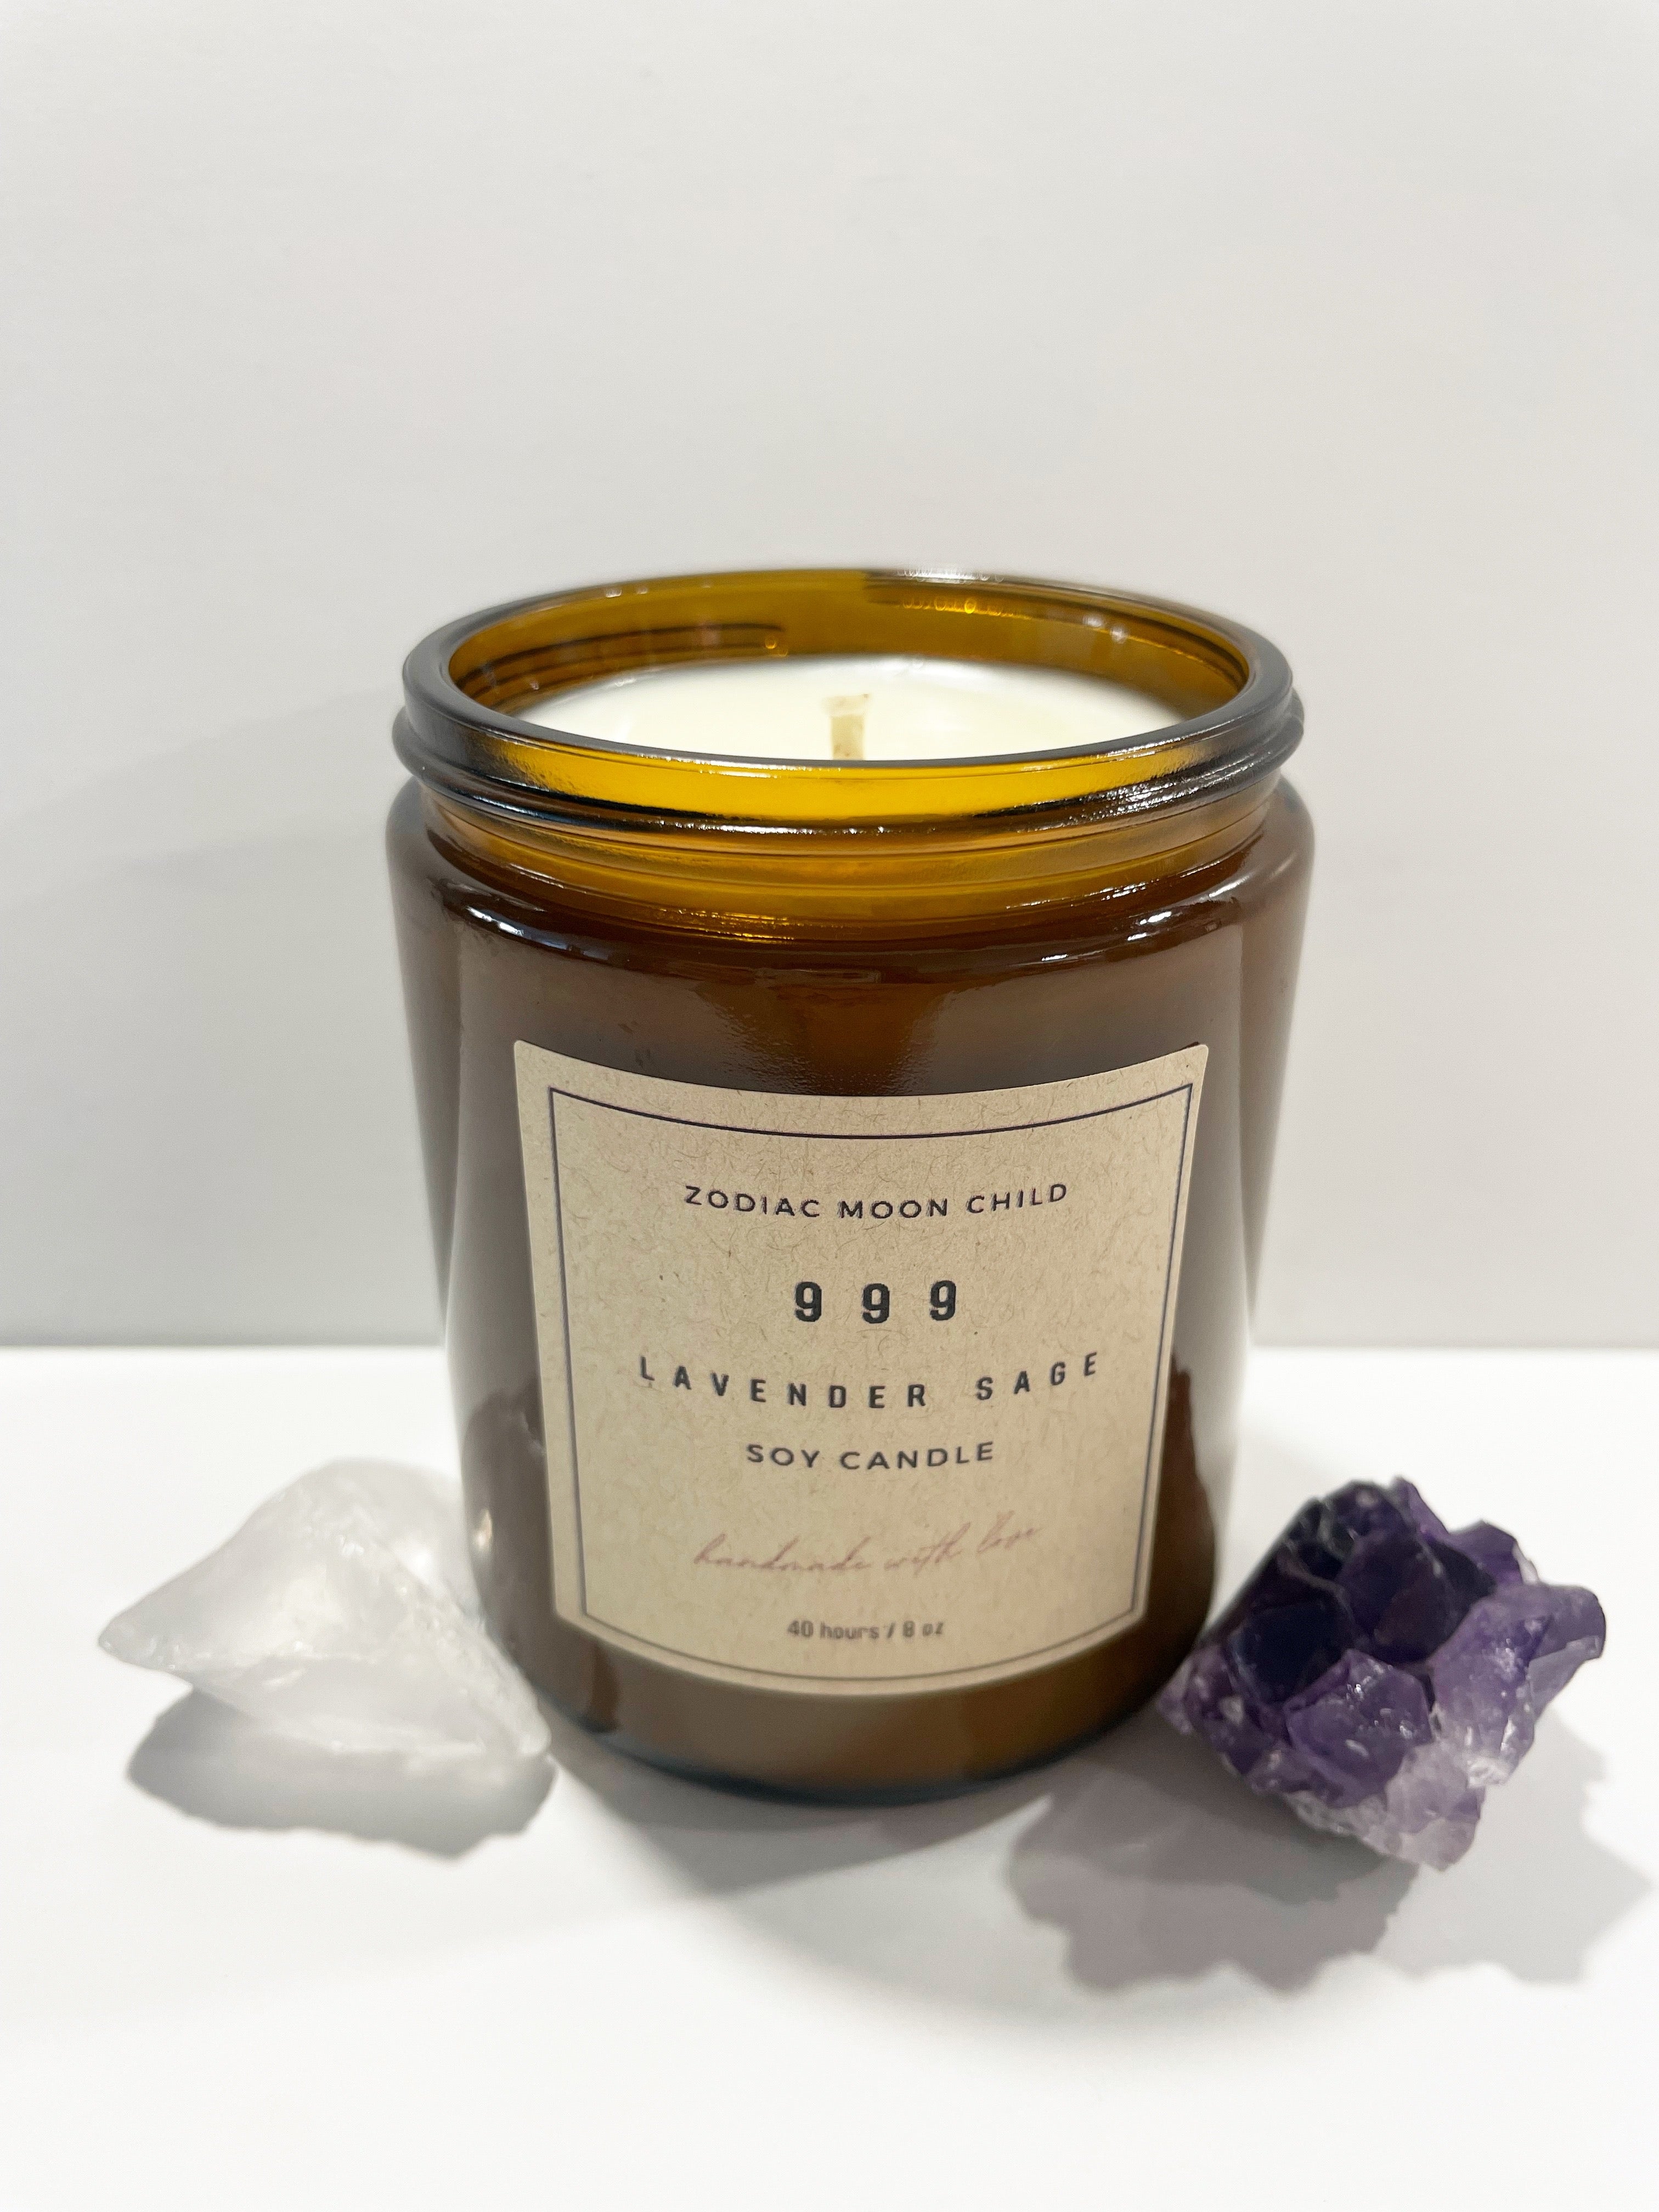 Angel Number 999 - Tranquil Amber Spiritual Soy Candle: Enhance Positivity & Elevate Your Sacred Zen Space with 100% Natural Soy Wax, Energy